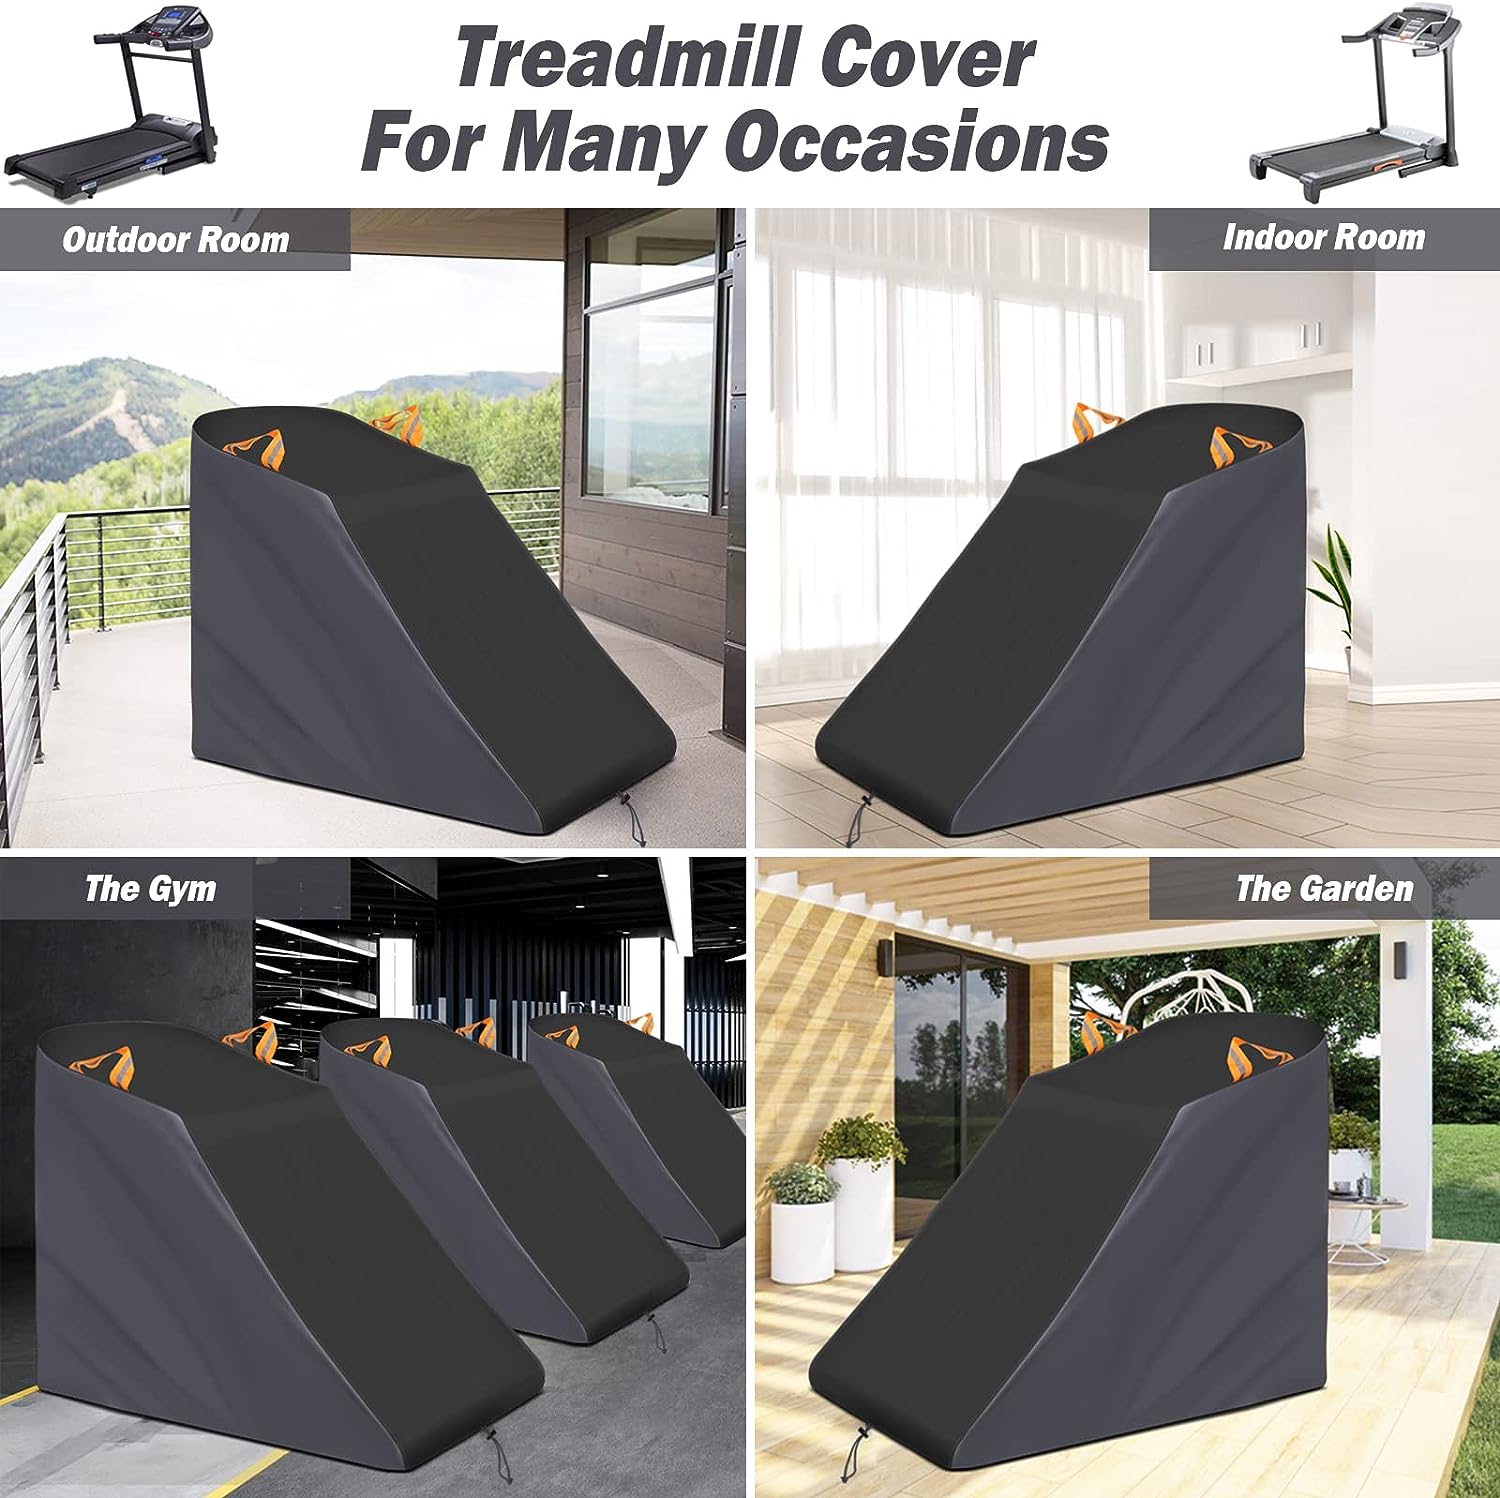 XYZCTEM Treadmill Cover Waterproof Dustproof Running Machine Cover Exercise Workout Equipment Protective with Windproof Drawstring and Air Vents for Home Gym Indoor Outdoor